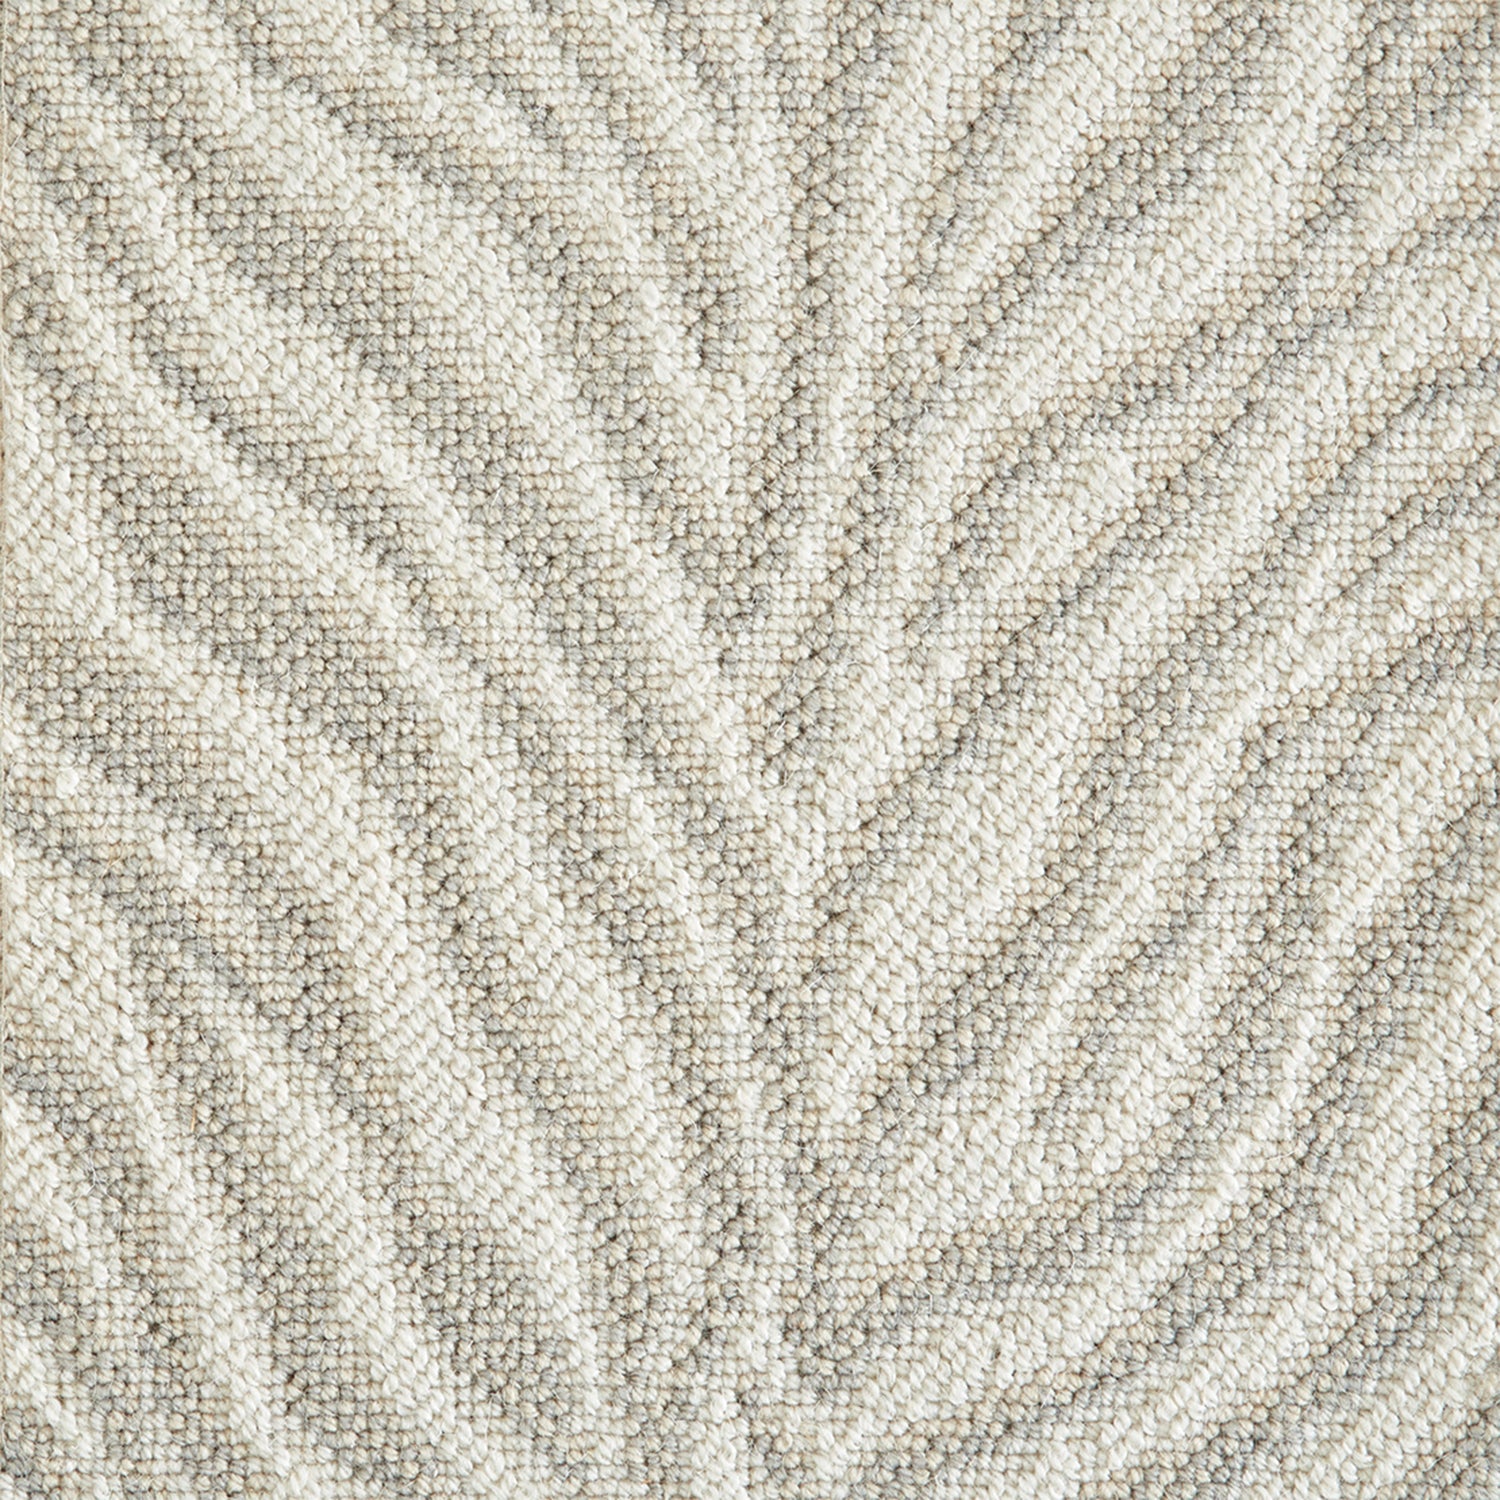 Wool-blend broadloom carpet swatch in an animal print in shades of cream, tan and gray.